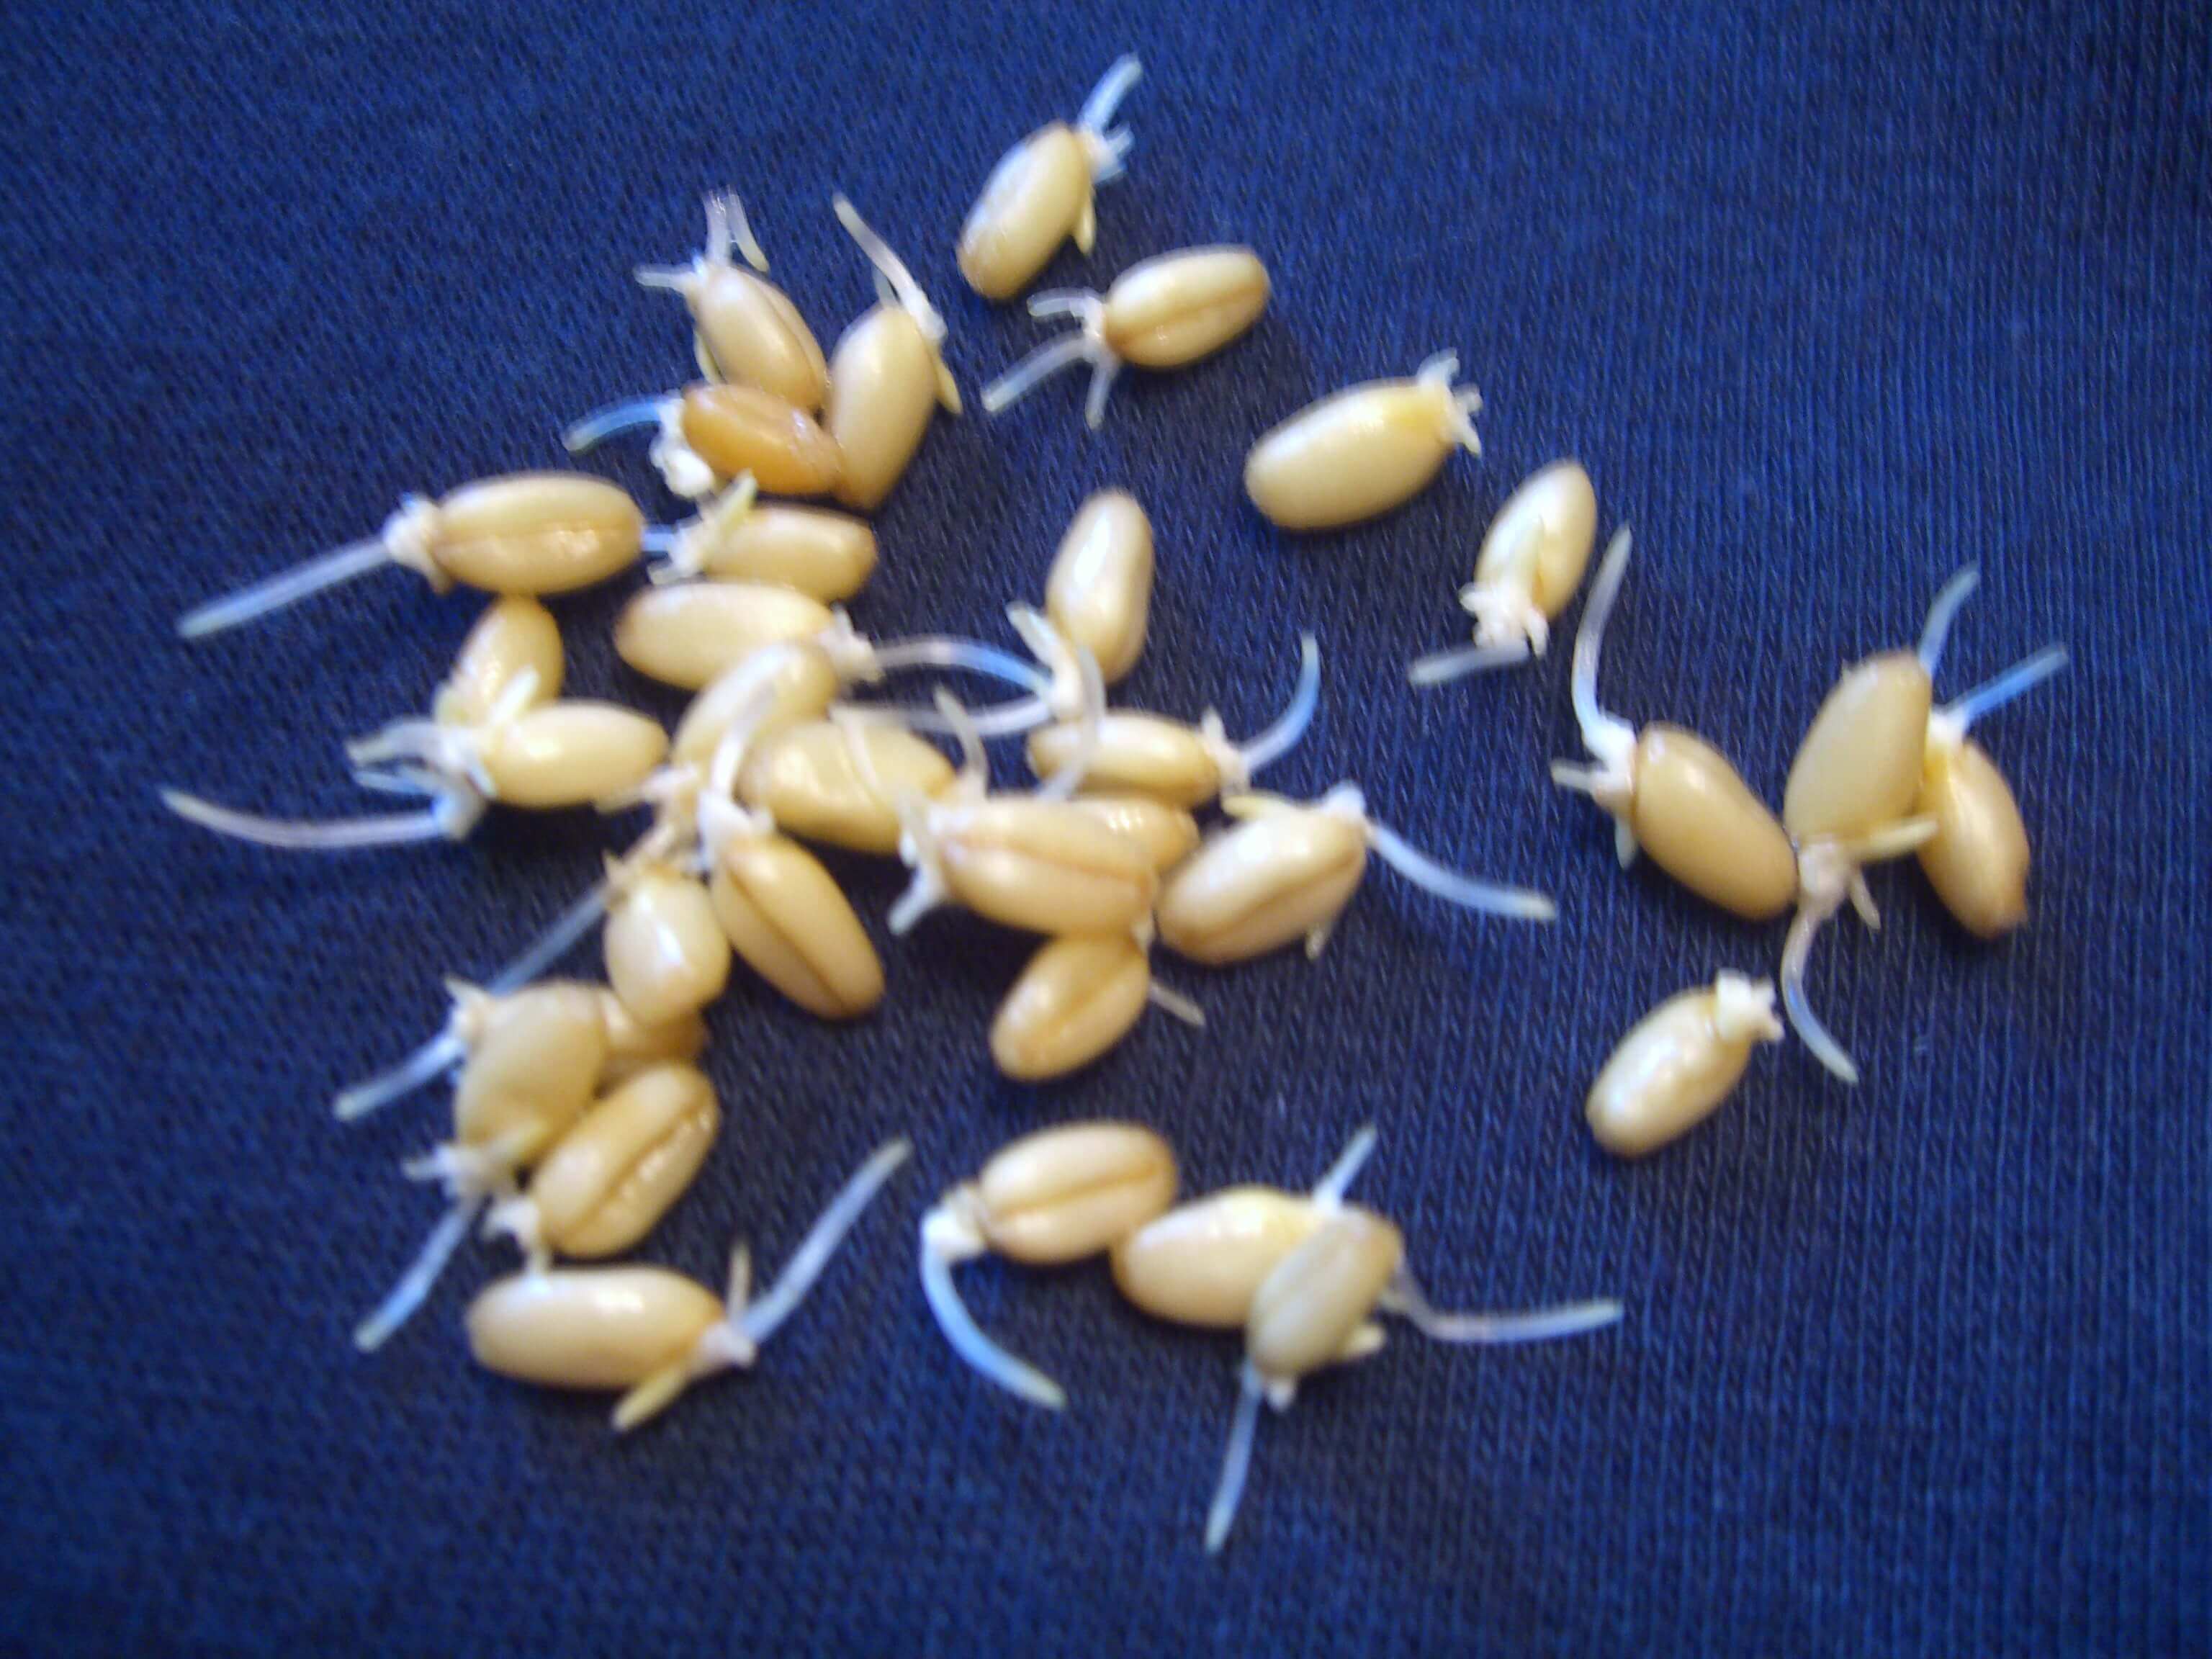 Getting Started Sprouting Wheat Berries